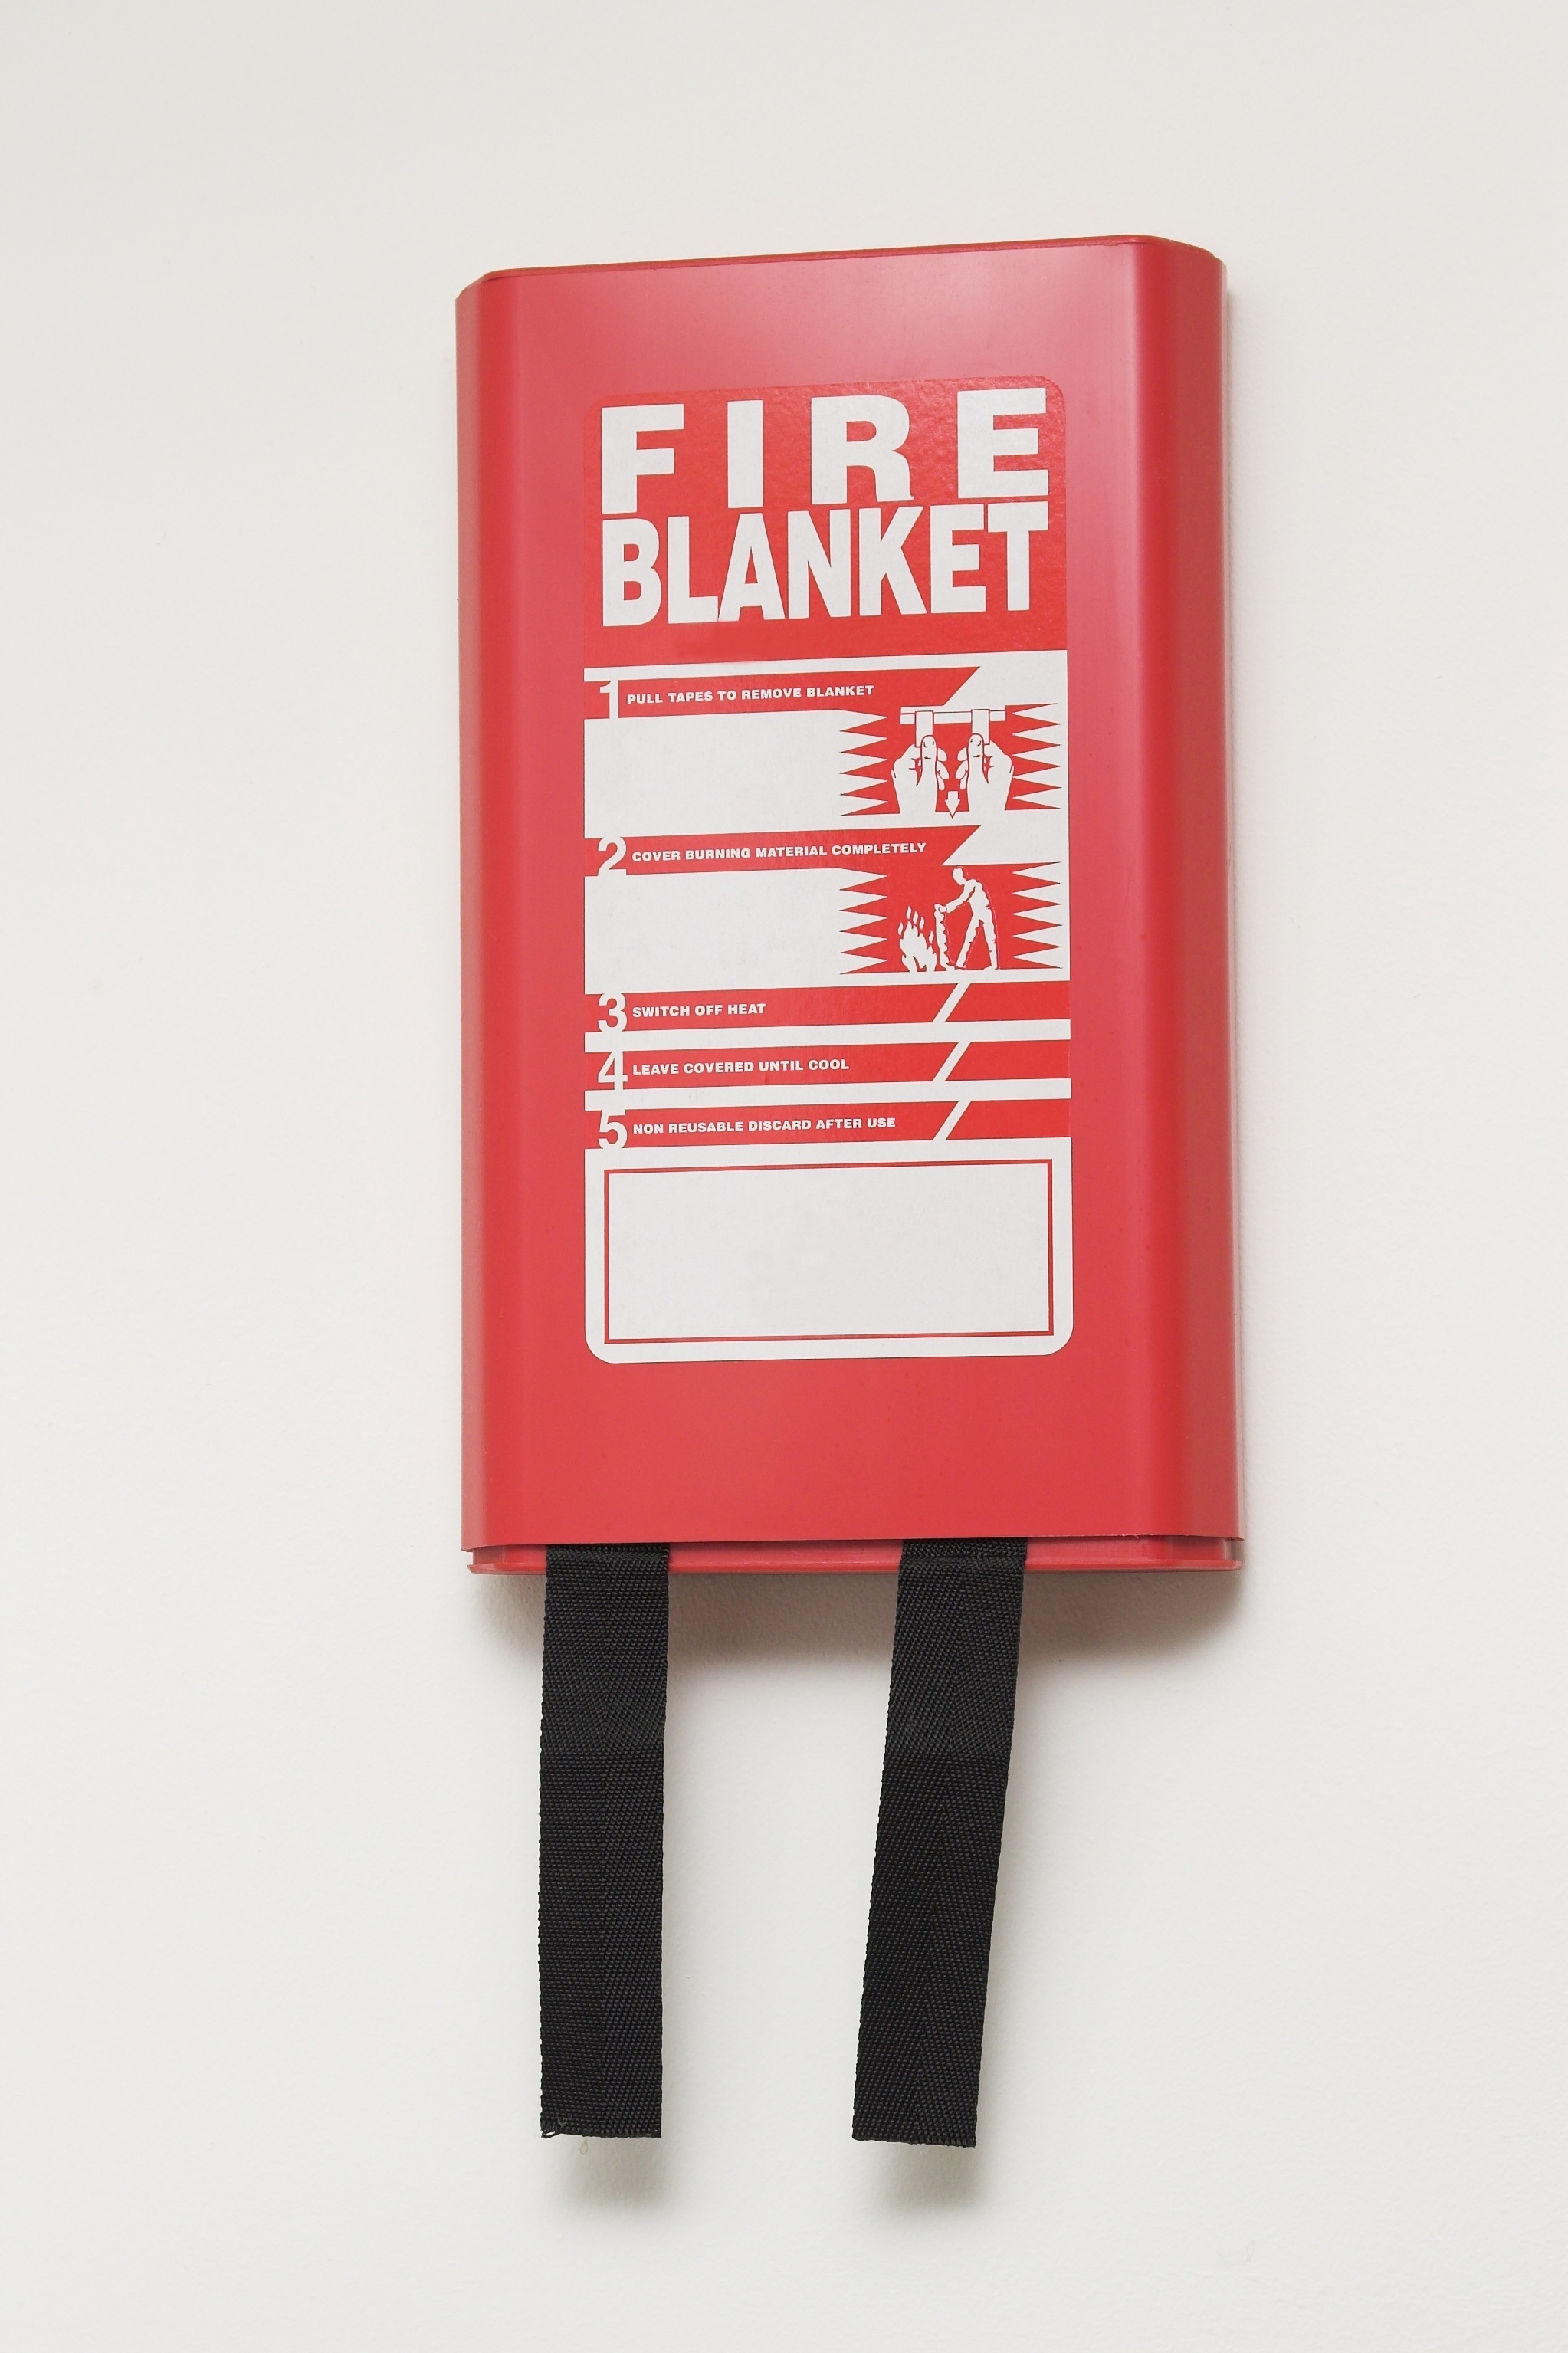 Fire blankets to protect your family